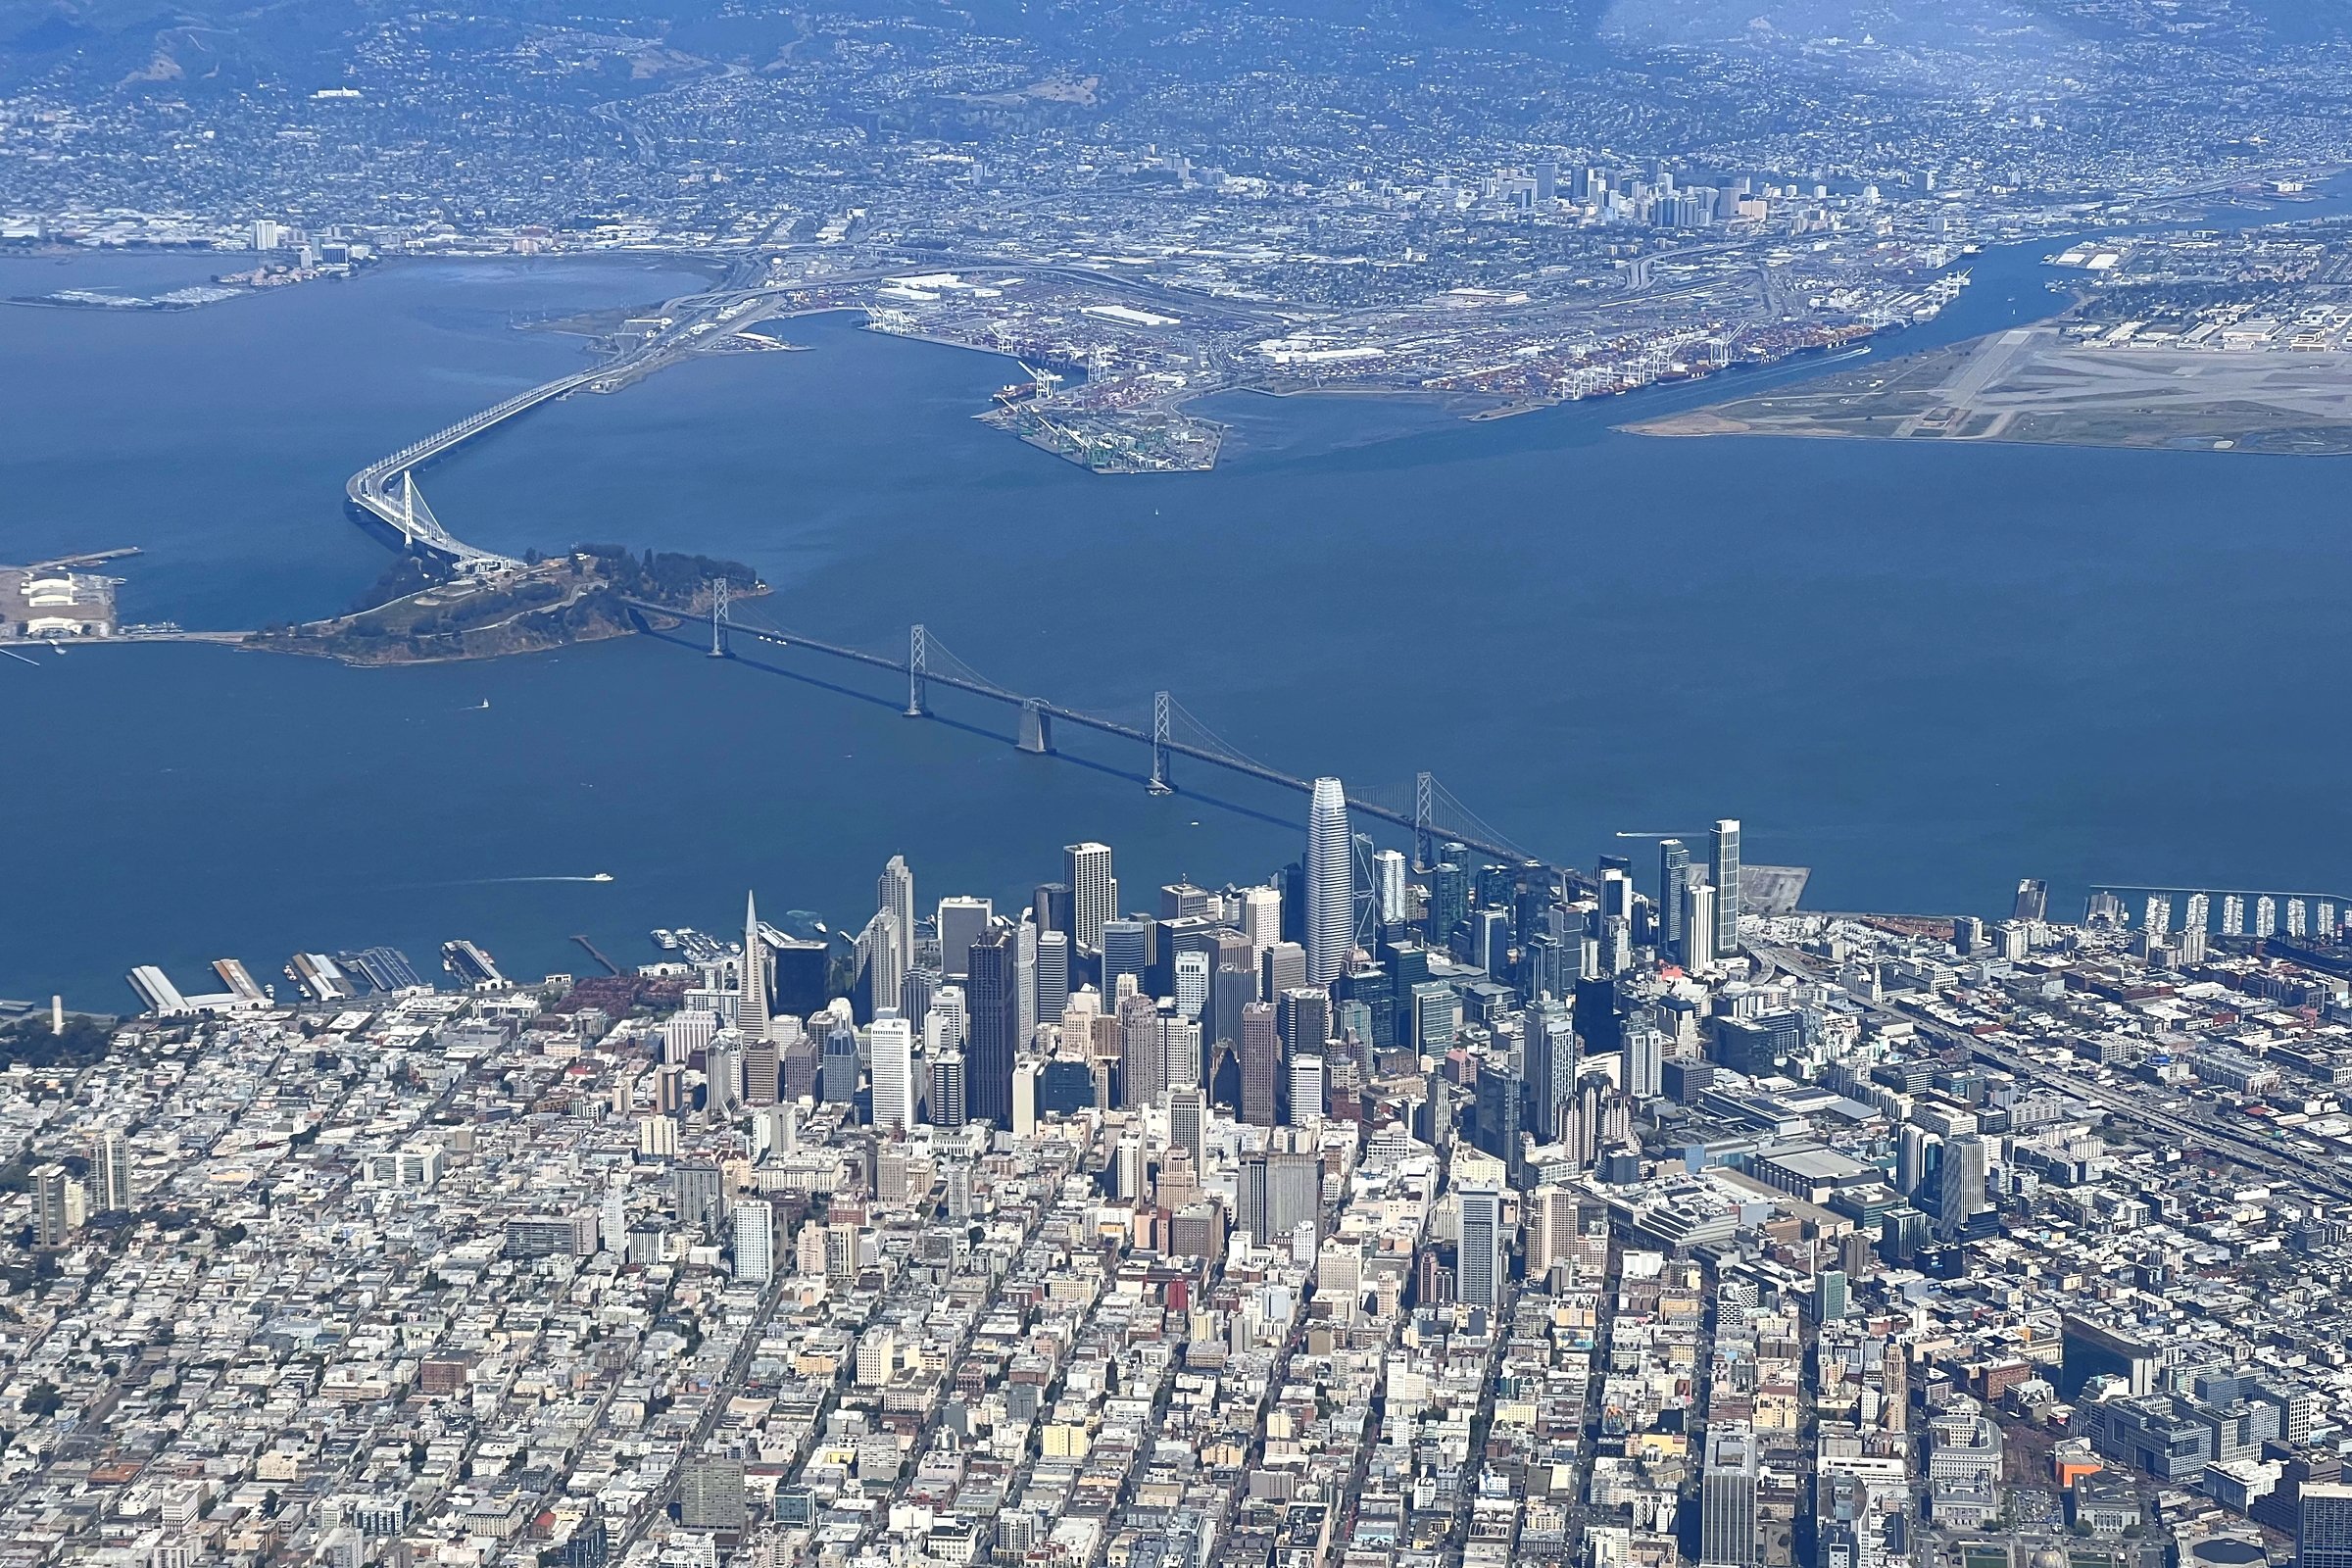 A nice view of downtown San Francisco, the Bay Bridge and Oakland as we descended into Santa Rosa.